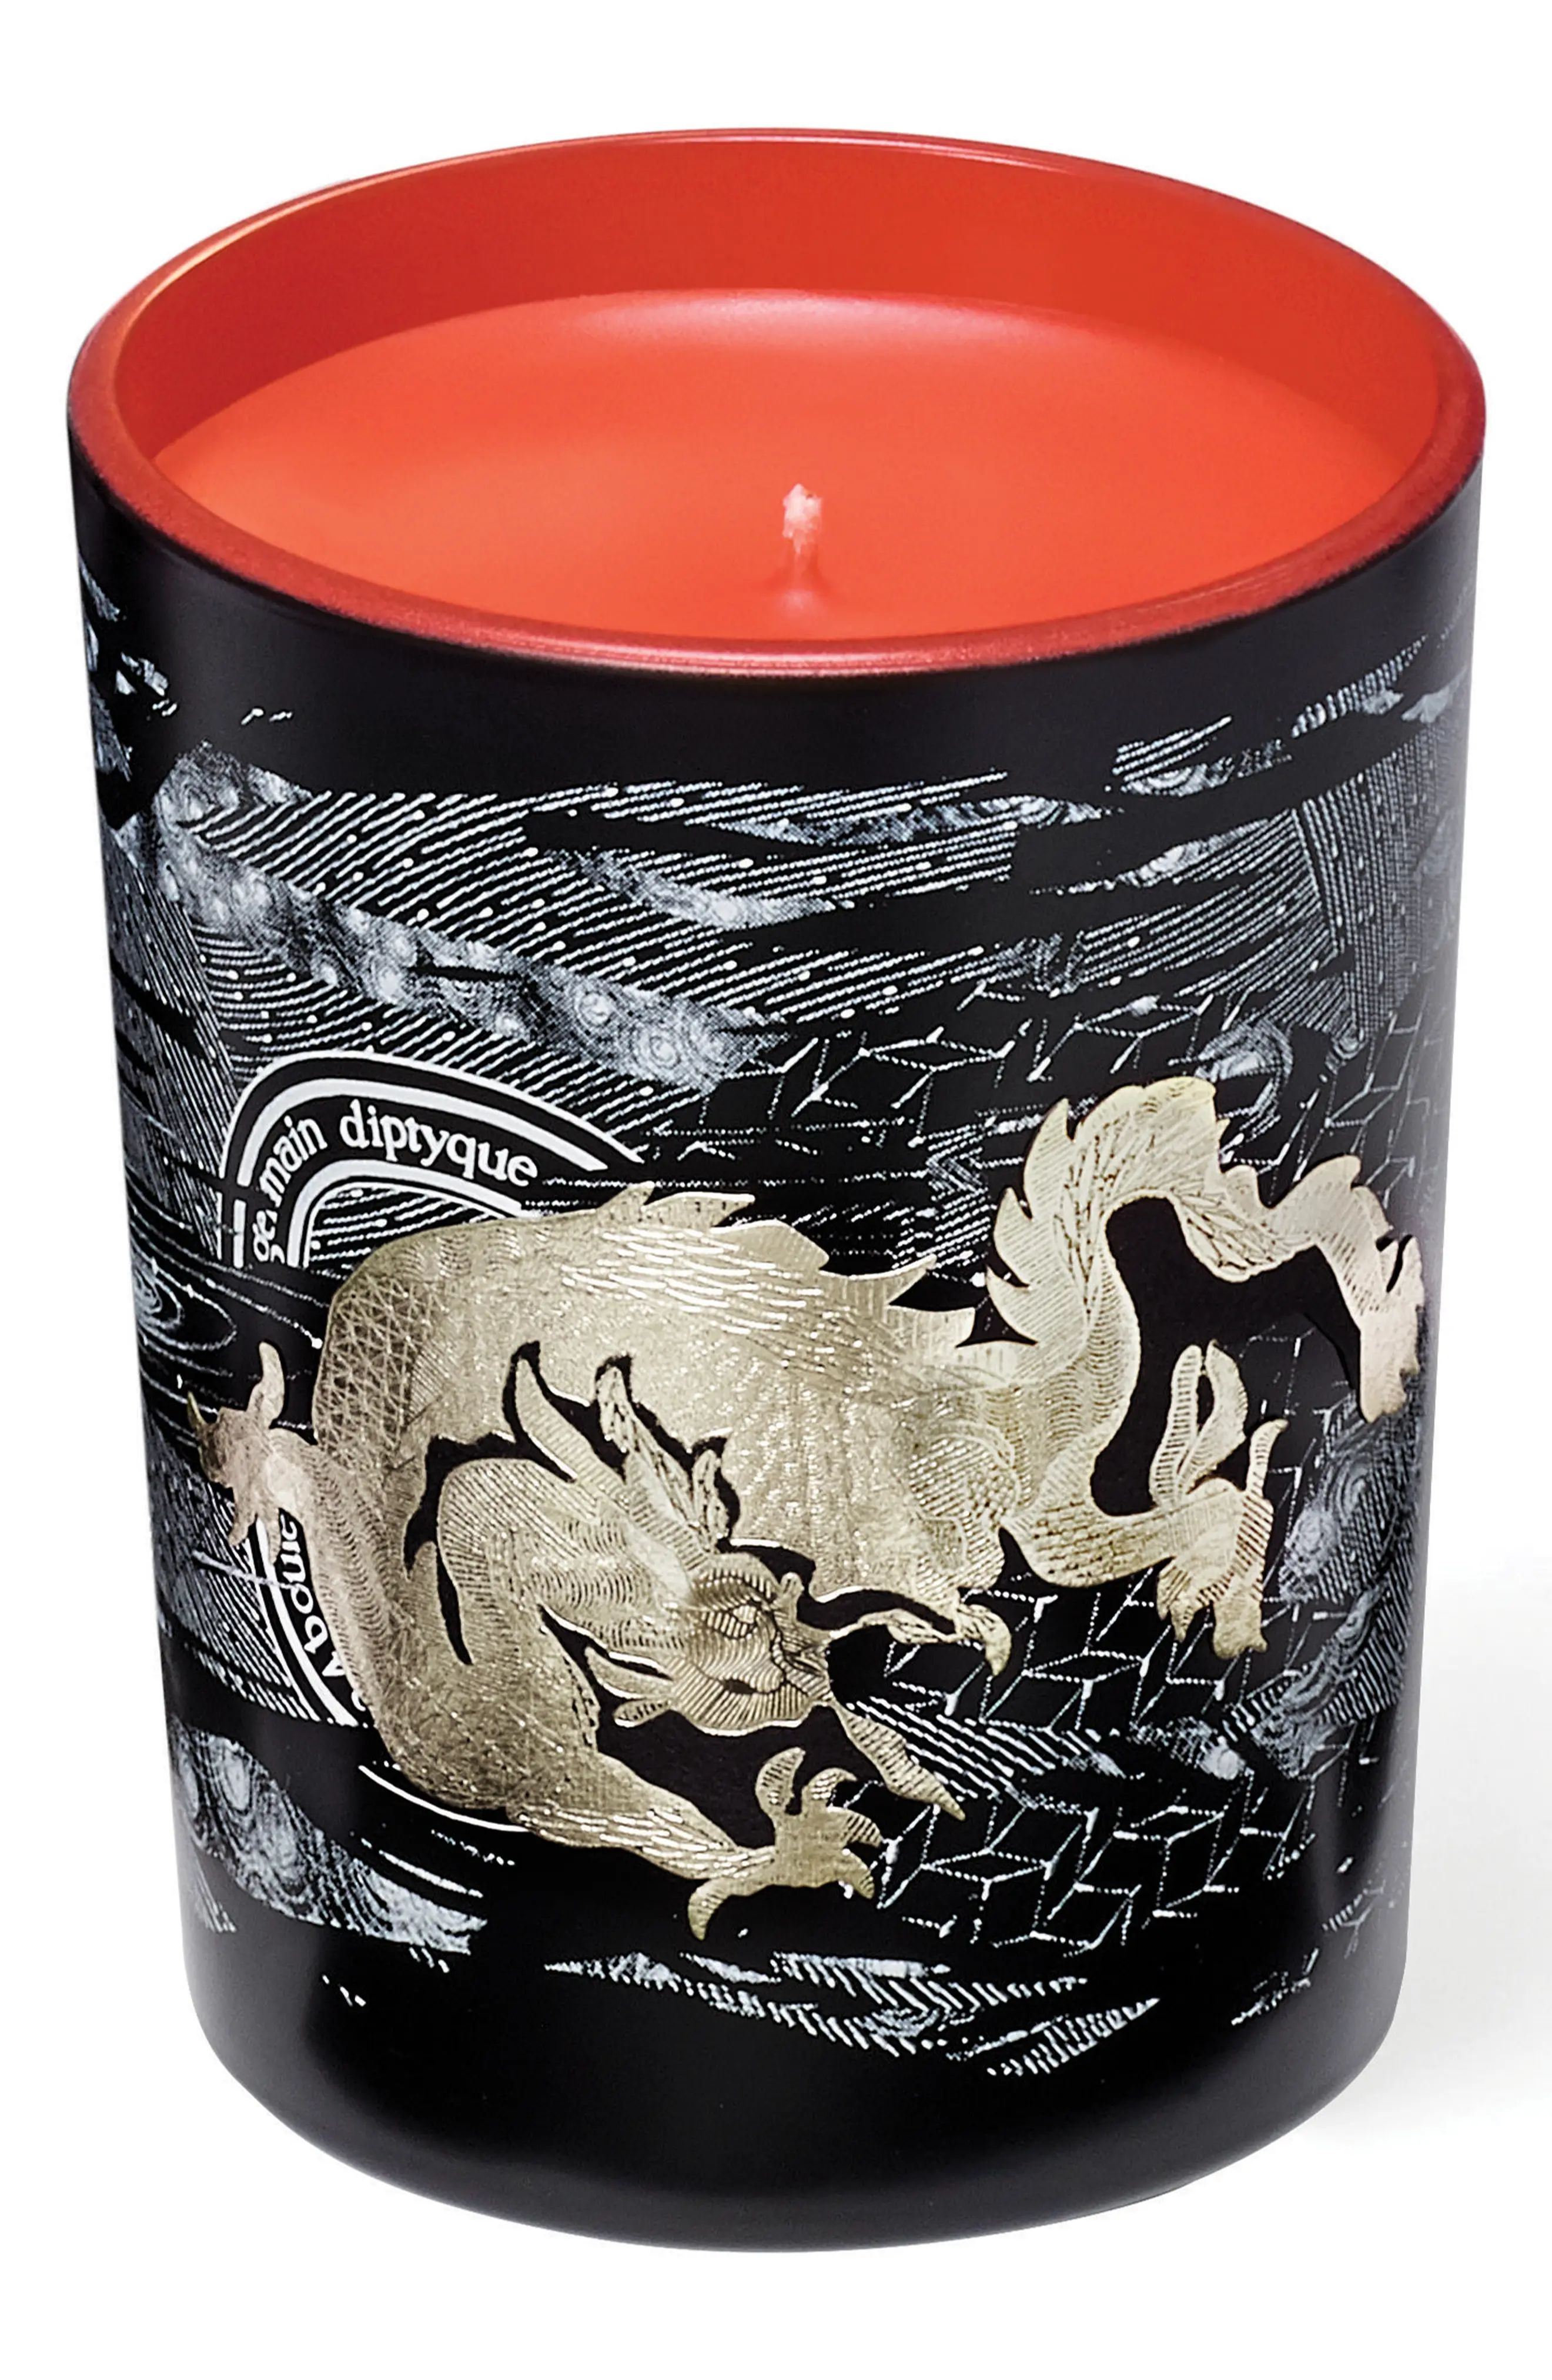 Feu d'Argumes/Fiery Orange Dragon Large Scented Candle | Nordstrom